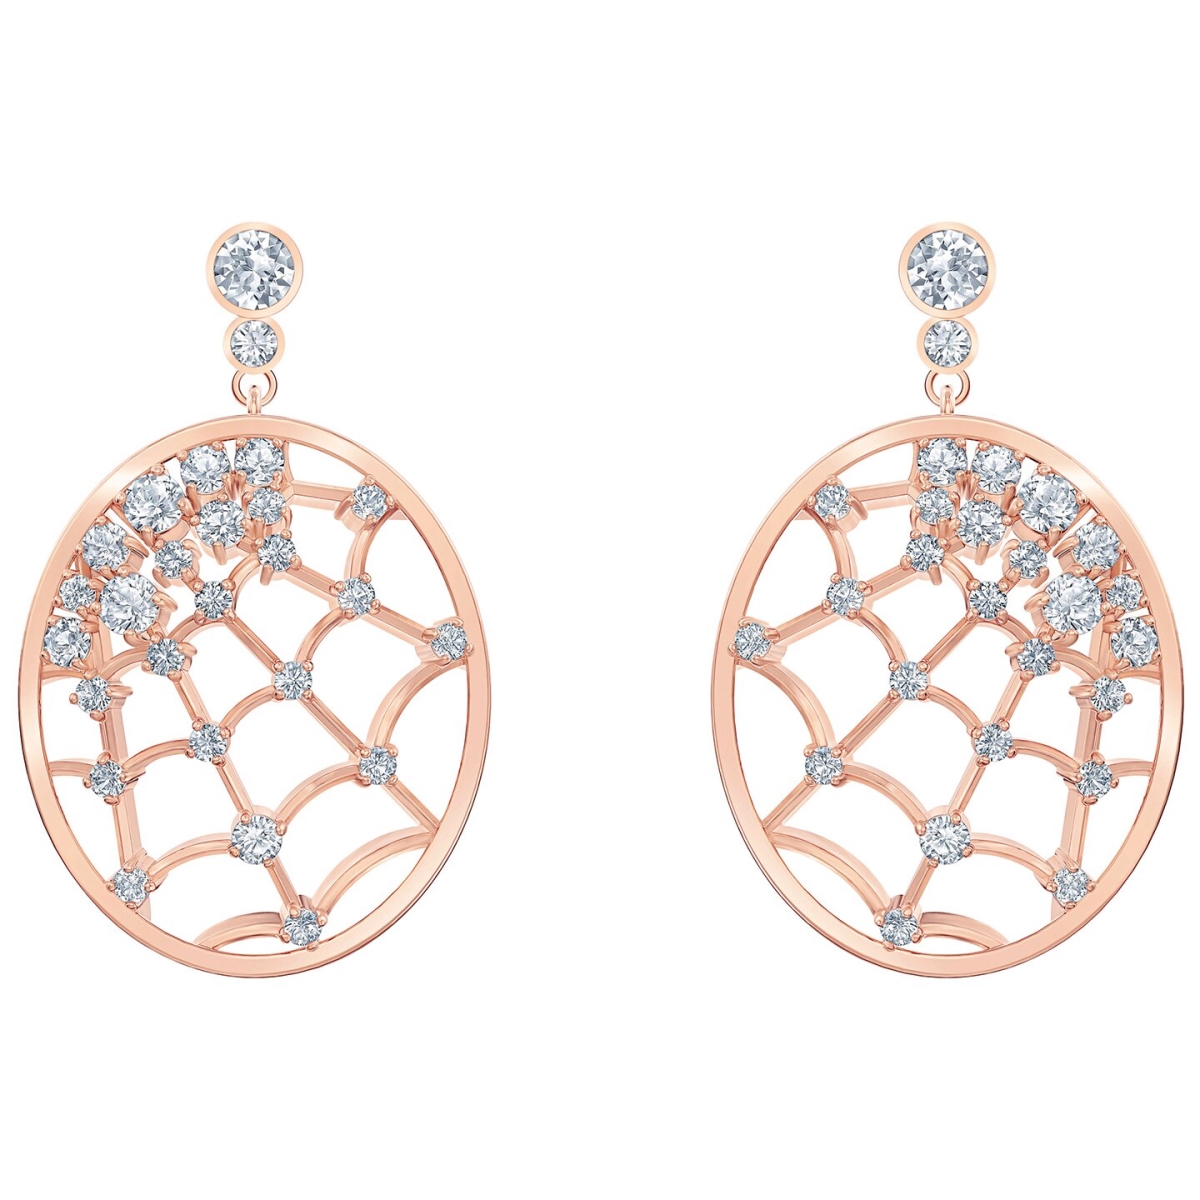 5488406 Precisely Drop Pierced Earrings, Rose-gold Tone Plated - White